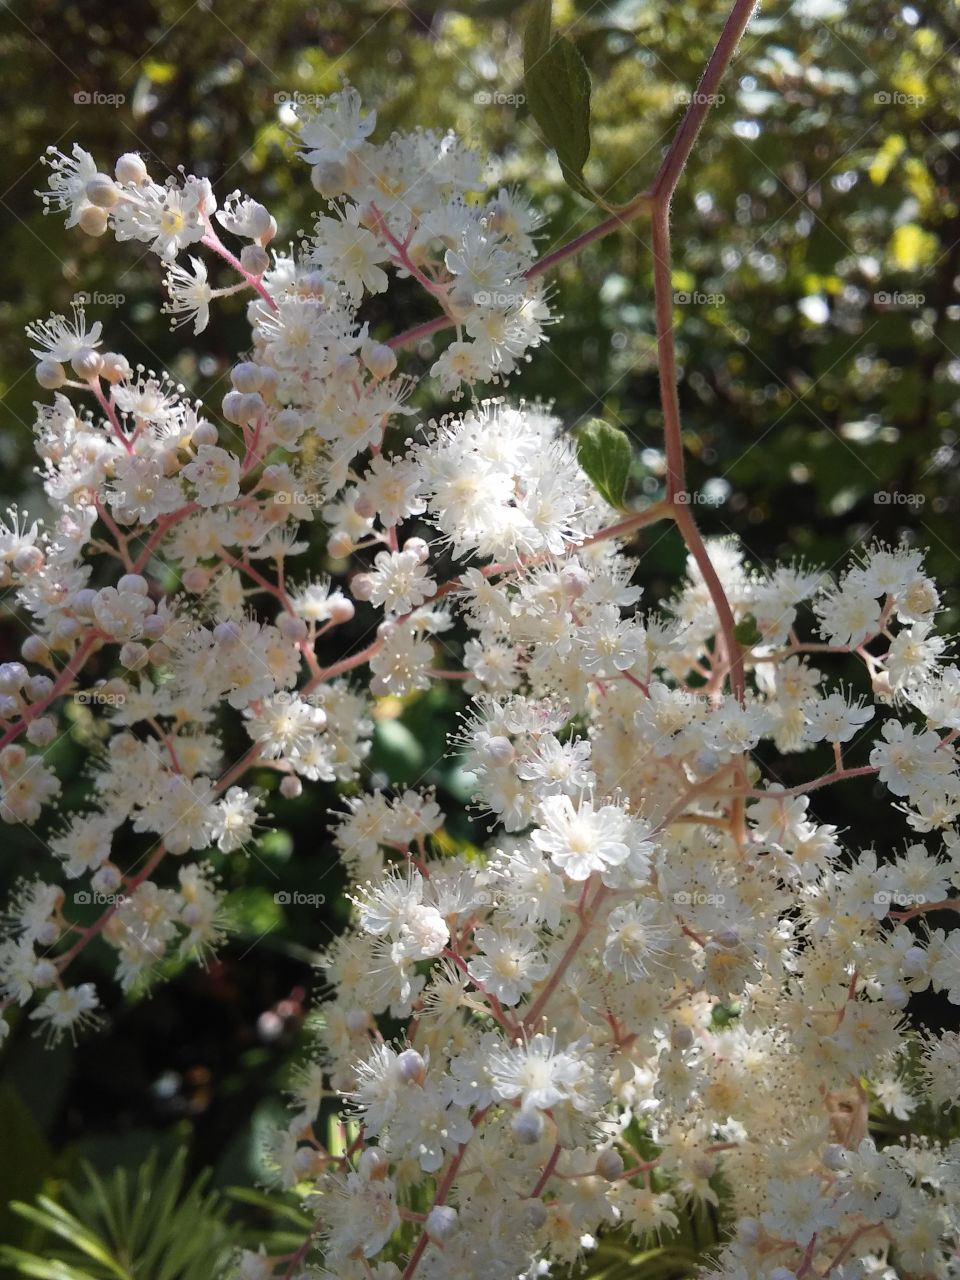 Ocean Spray Flowers in Washington state. Ocean spray is a flowering shrub which boasts many beautiful clusters of cascading off white flowers. It smells like tropical ocean beaches too!